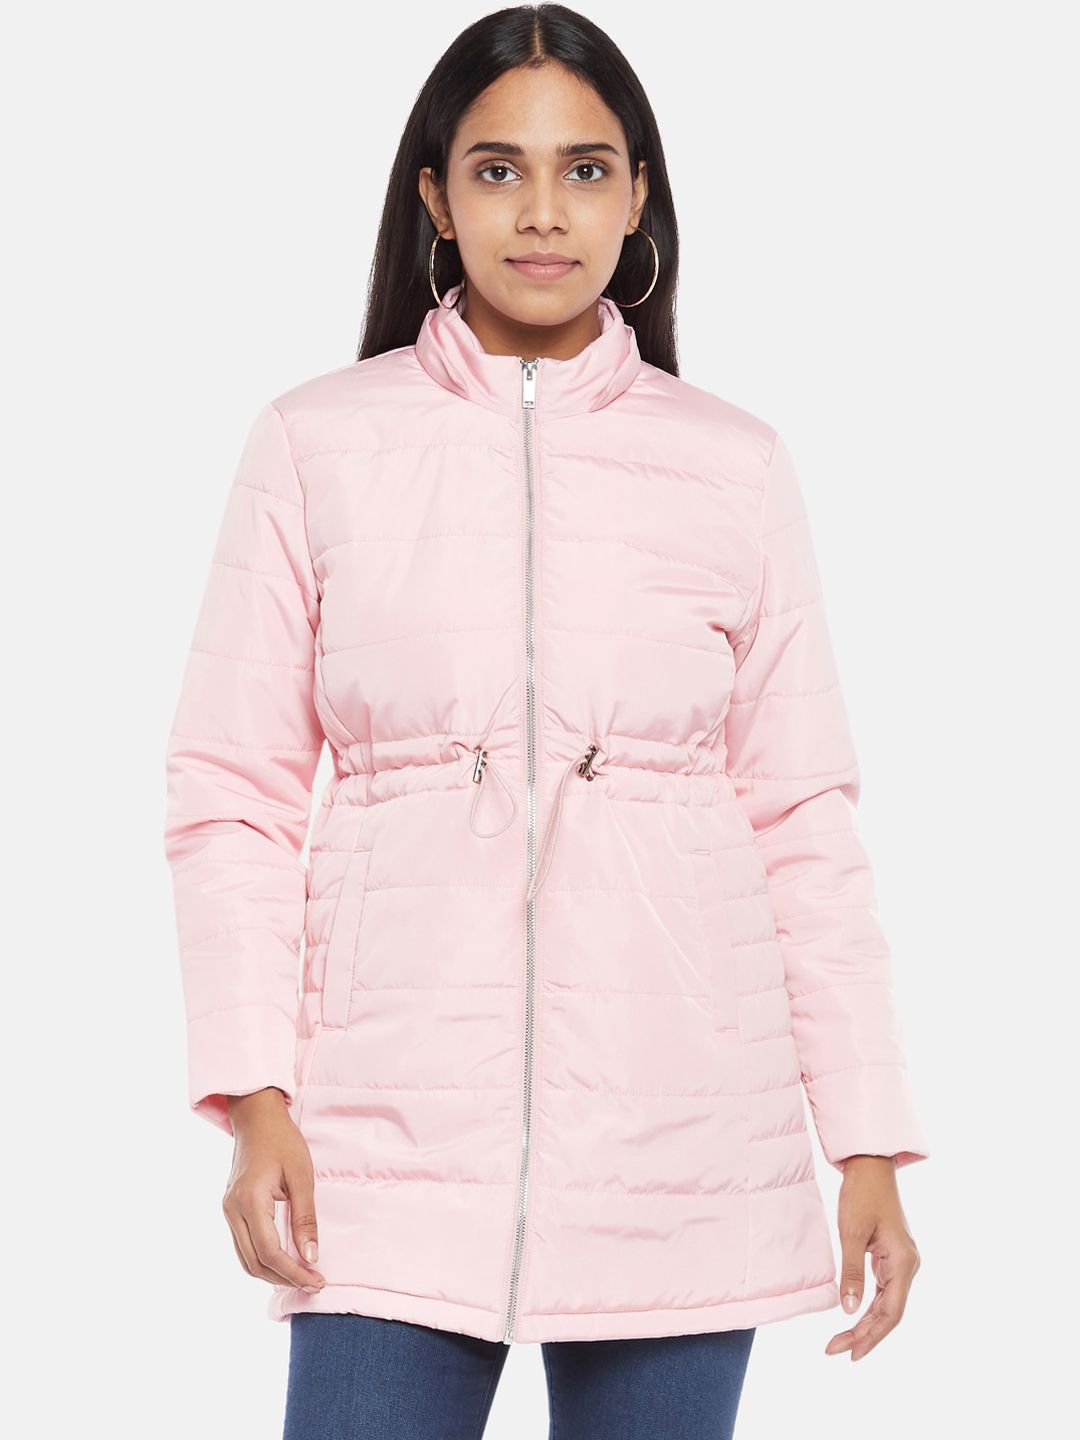 Honey by Pantaloons Women Pink Longline Padded Jacket Price in India